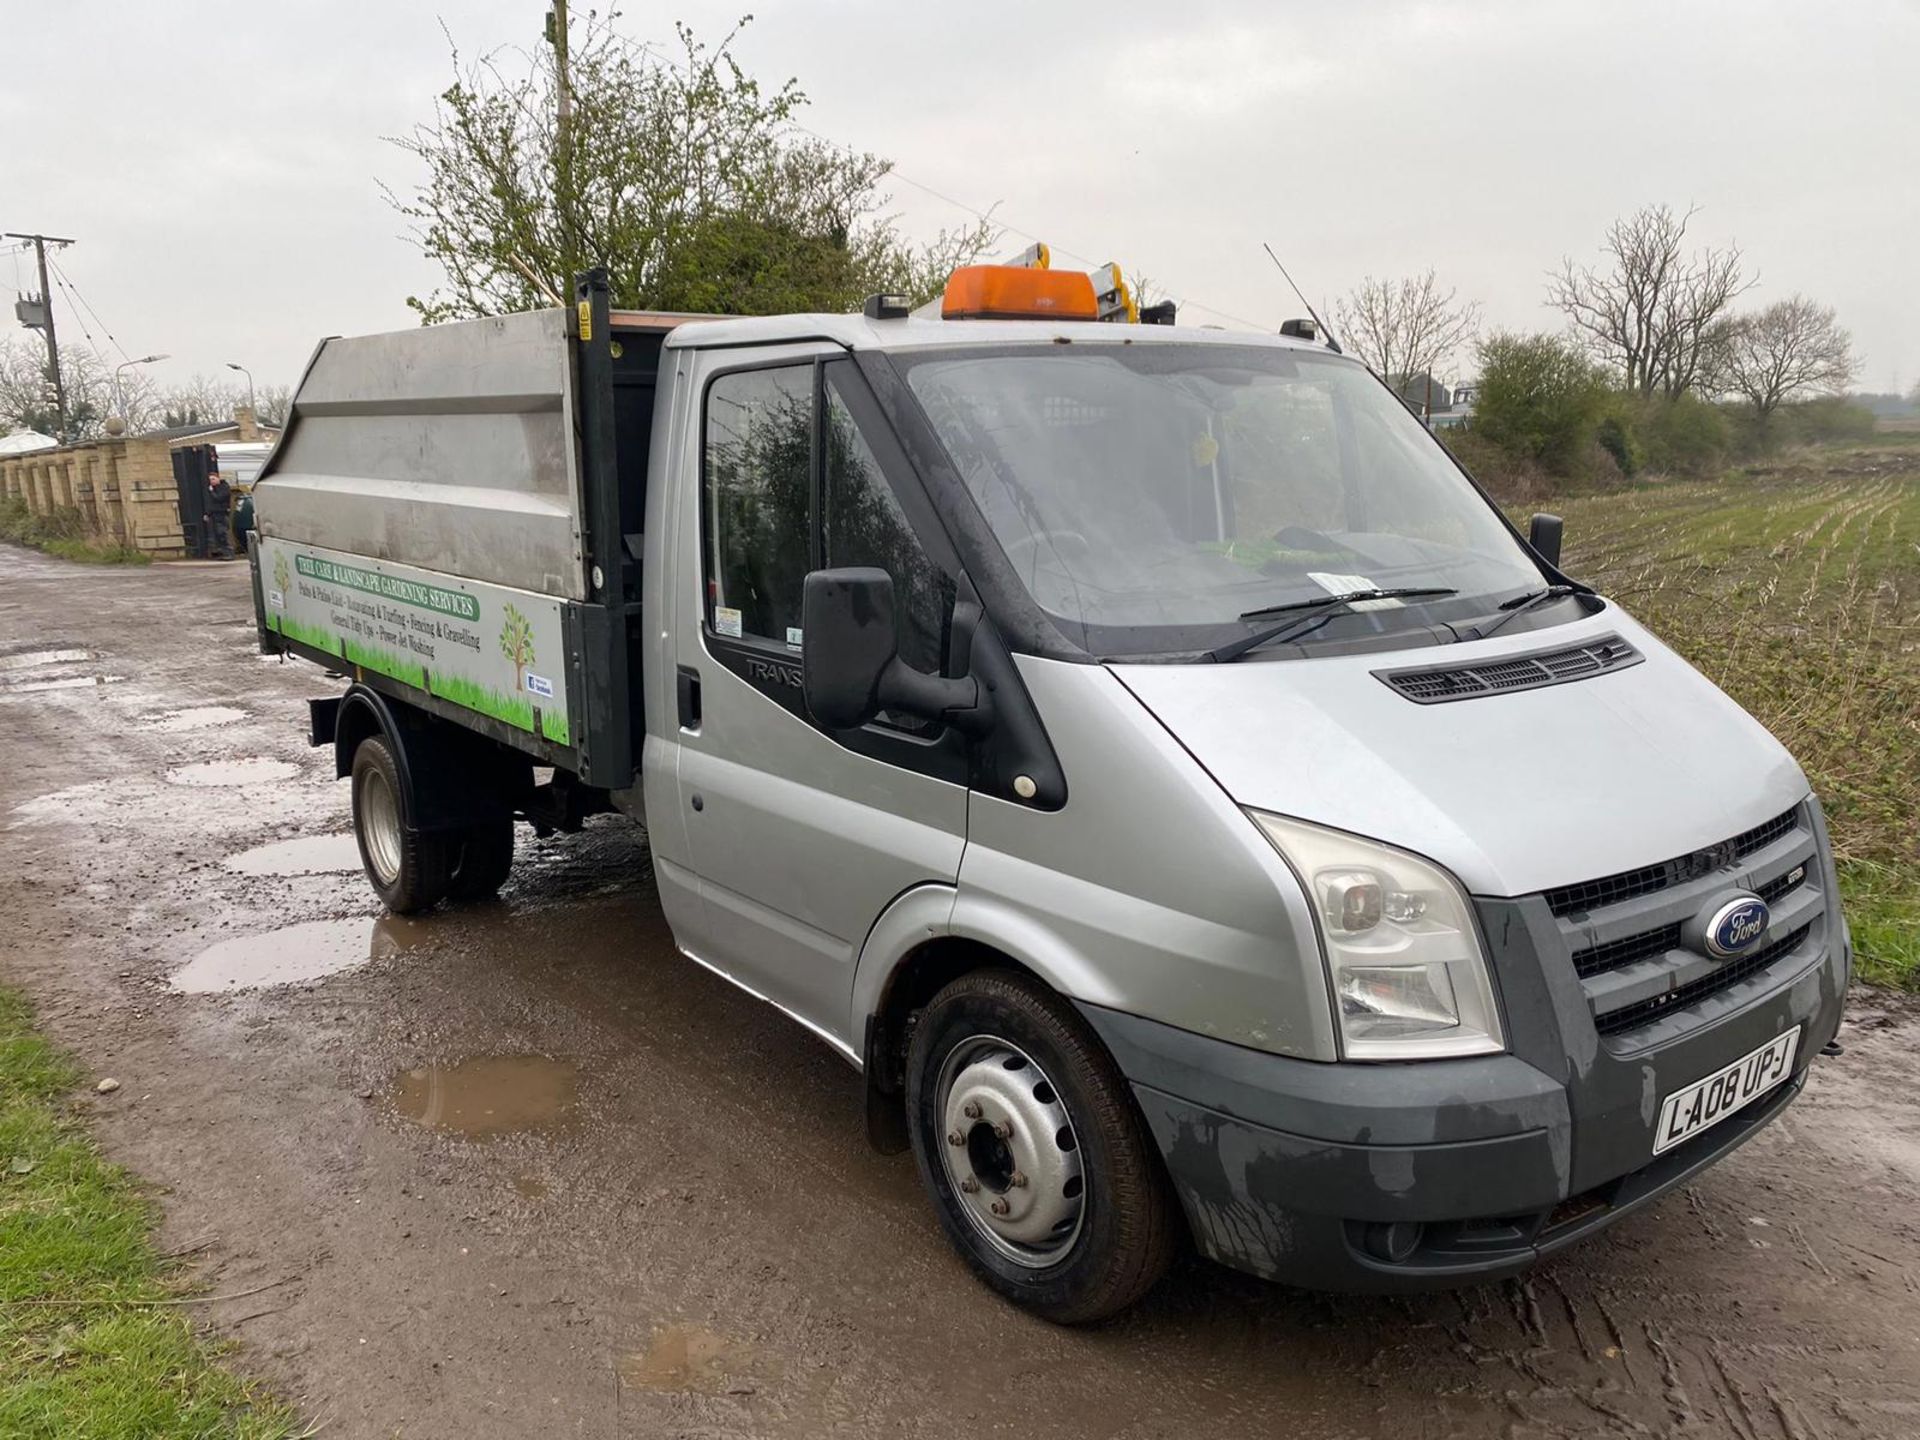 2008 FORD TRANSIT TIPPER - Image 2 of 5